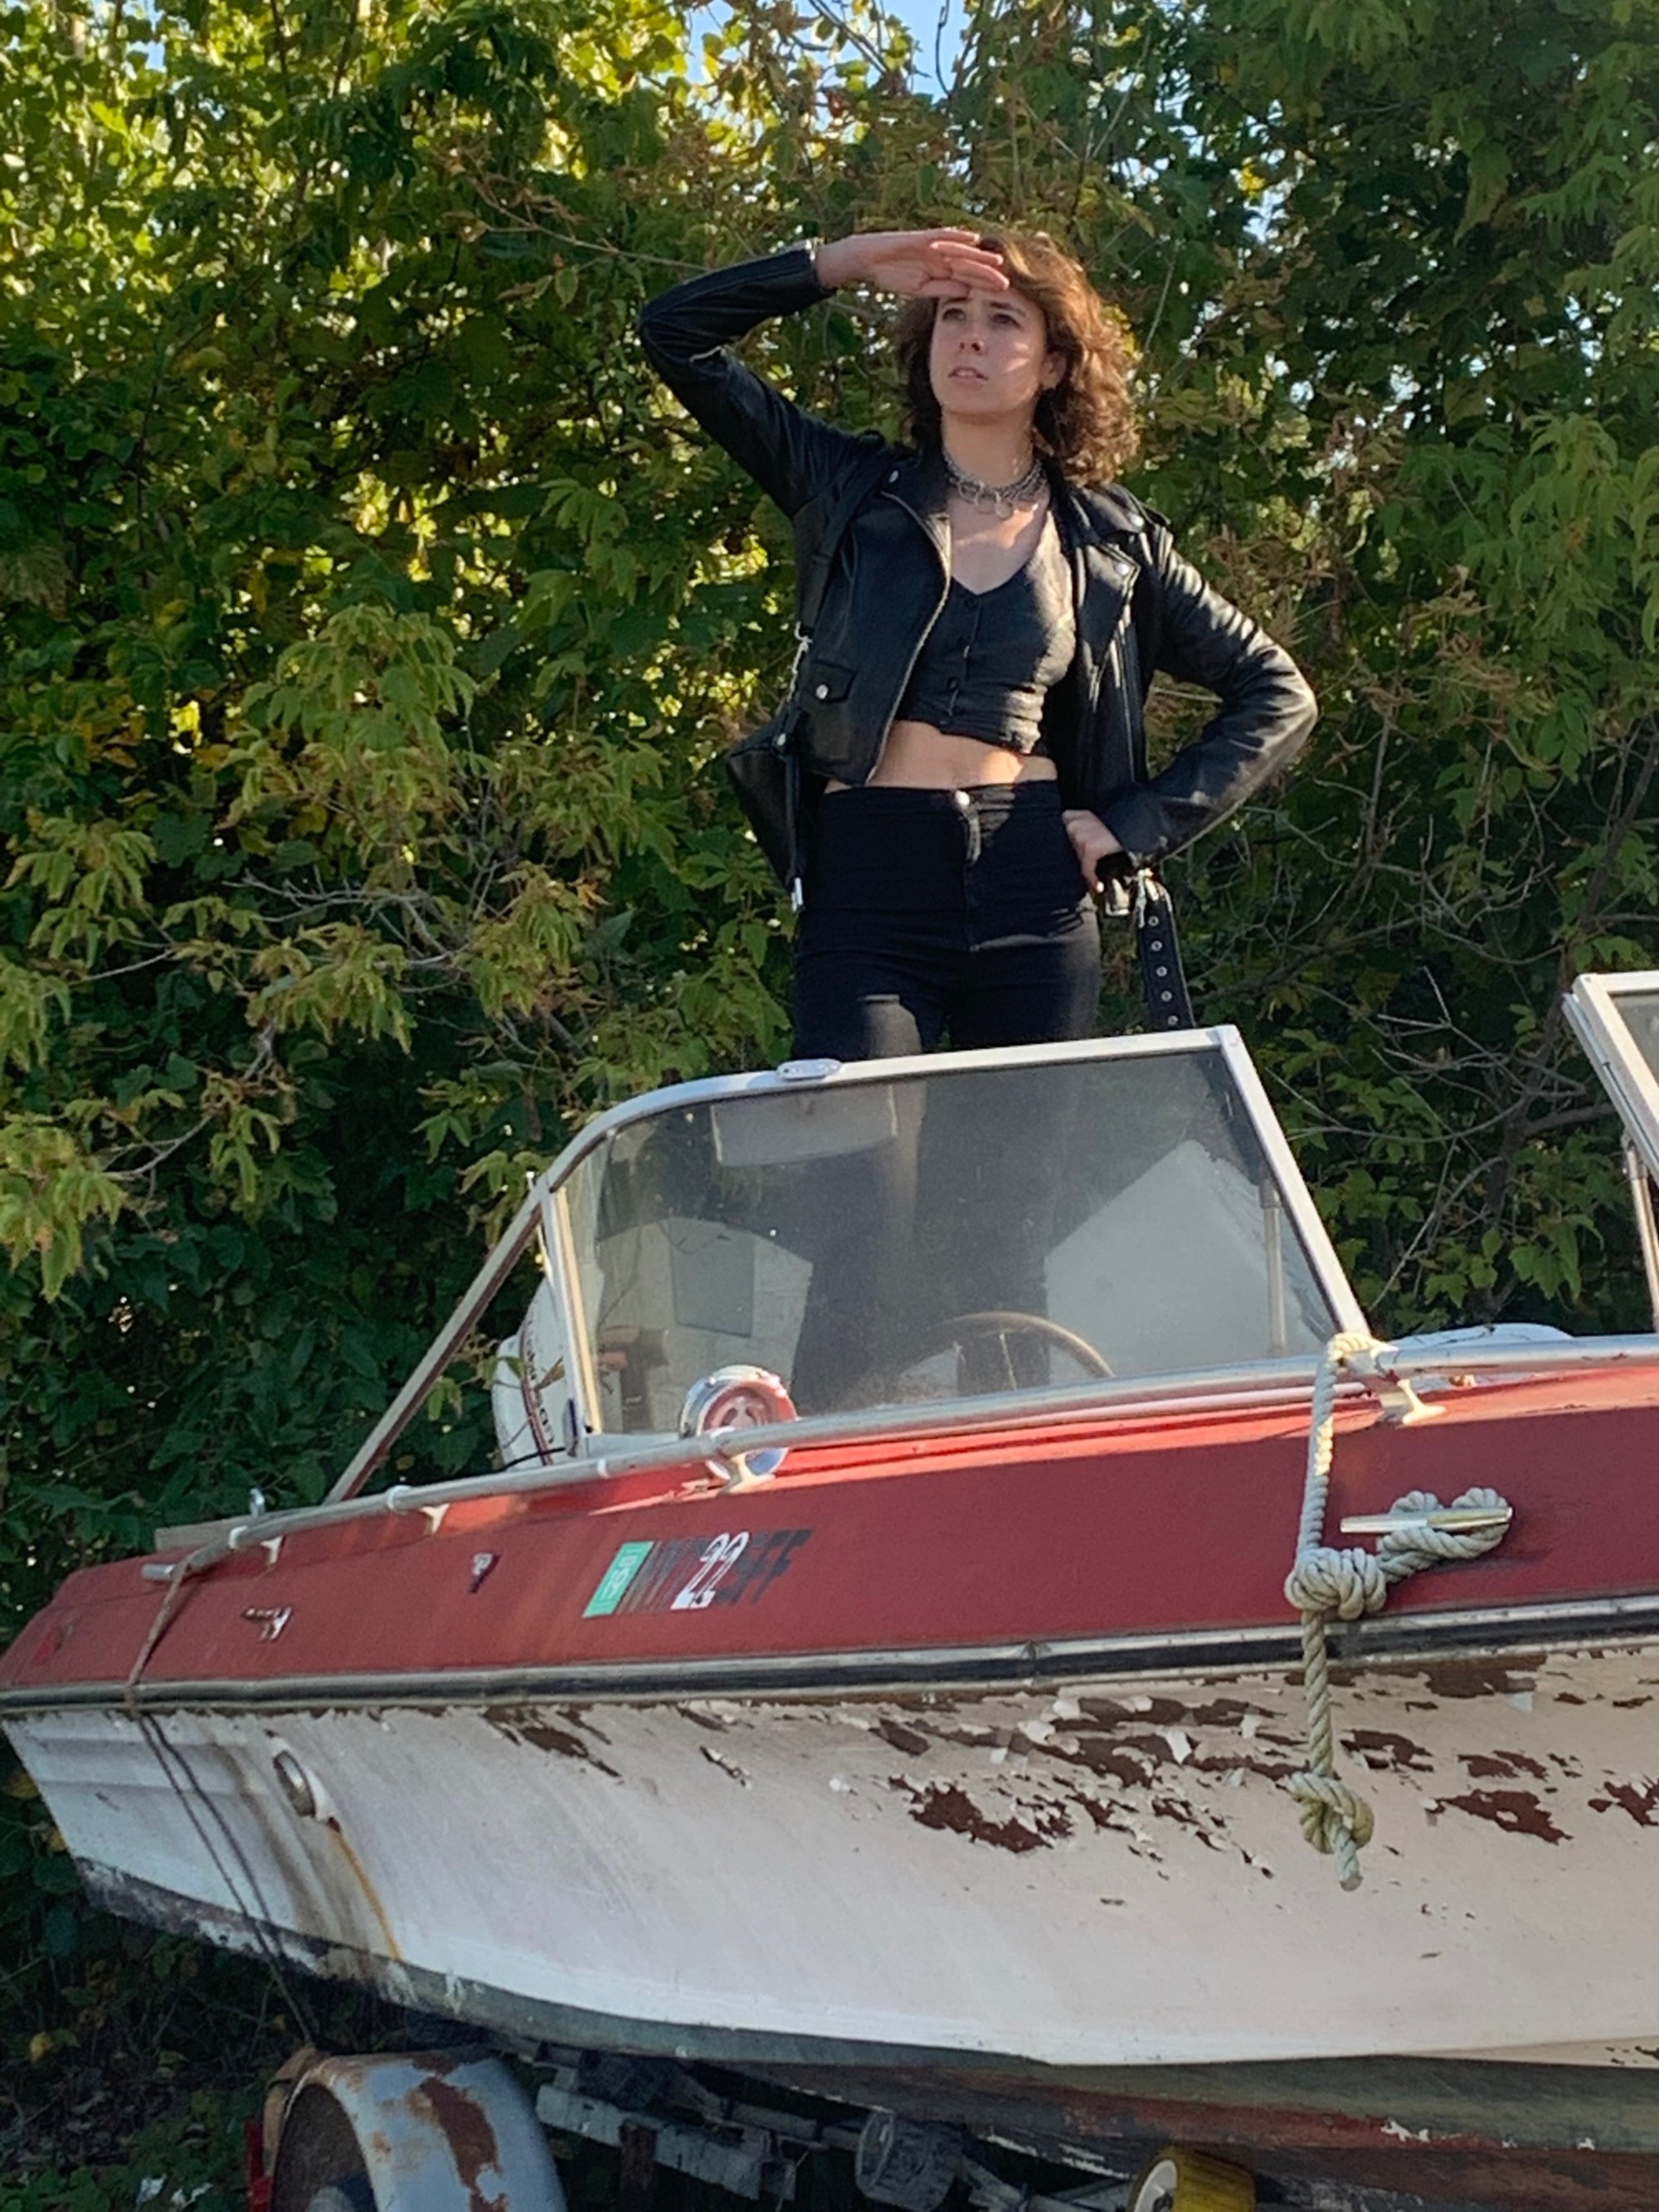 Rebecca Teich is dressed in all black, standing on a dilapidated boat parked on land, with green trees in the background, their hand raised to their eyebrows as if navigating.